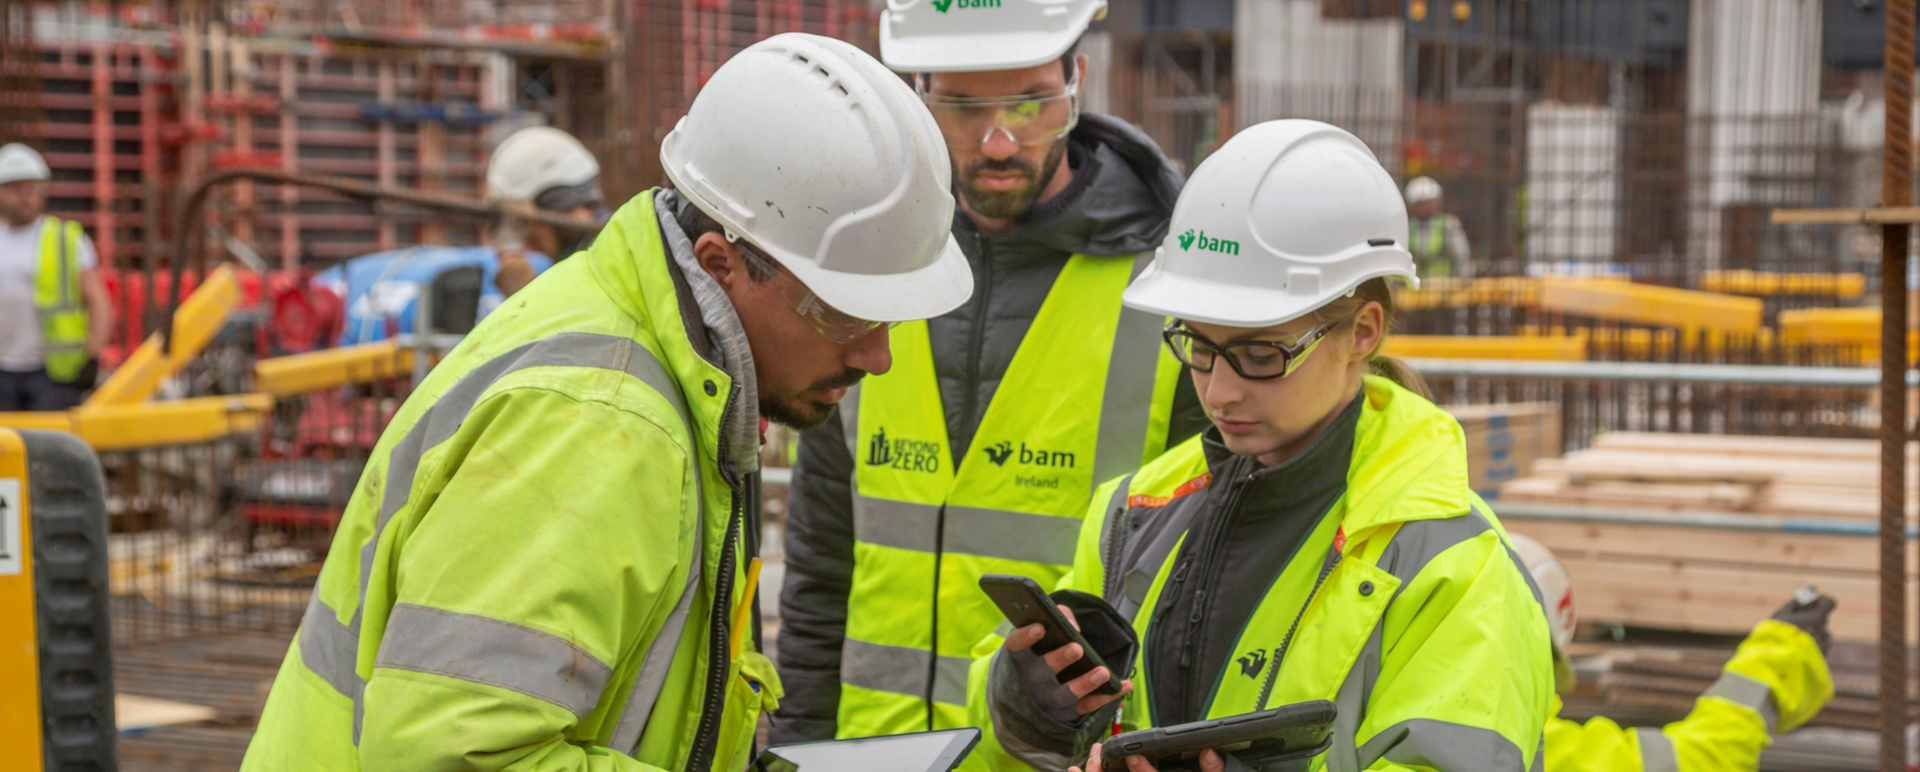 Construction workers on site using construction management software to improve performance.